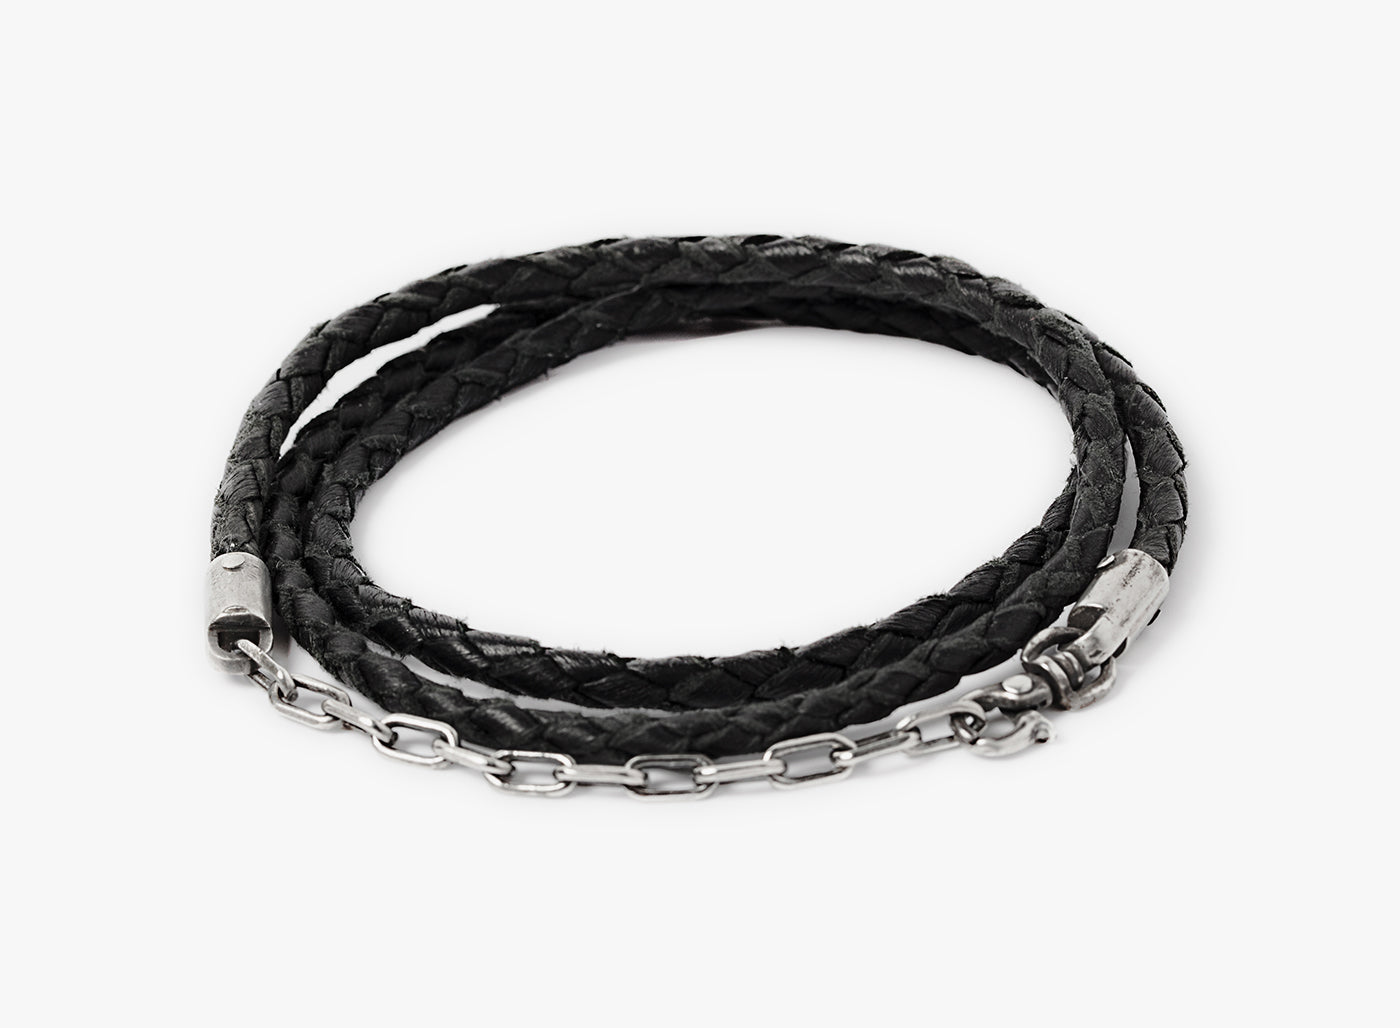 LEATHER BRACELET 171: this adjustable triple wrap bracelet features a hand-braided napa lamb cord, finished with a sterling anchor chain.